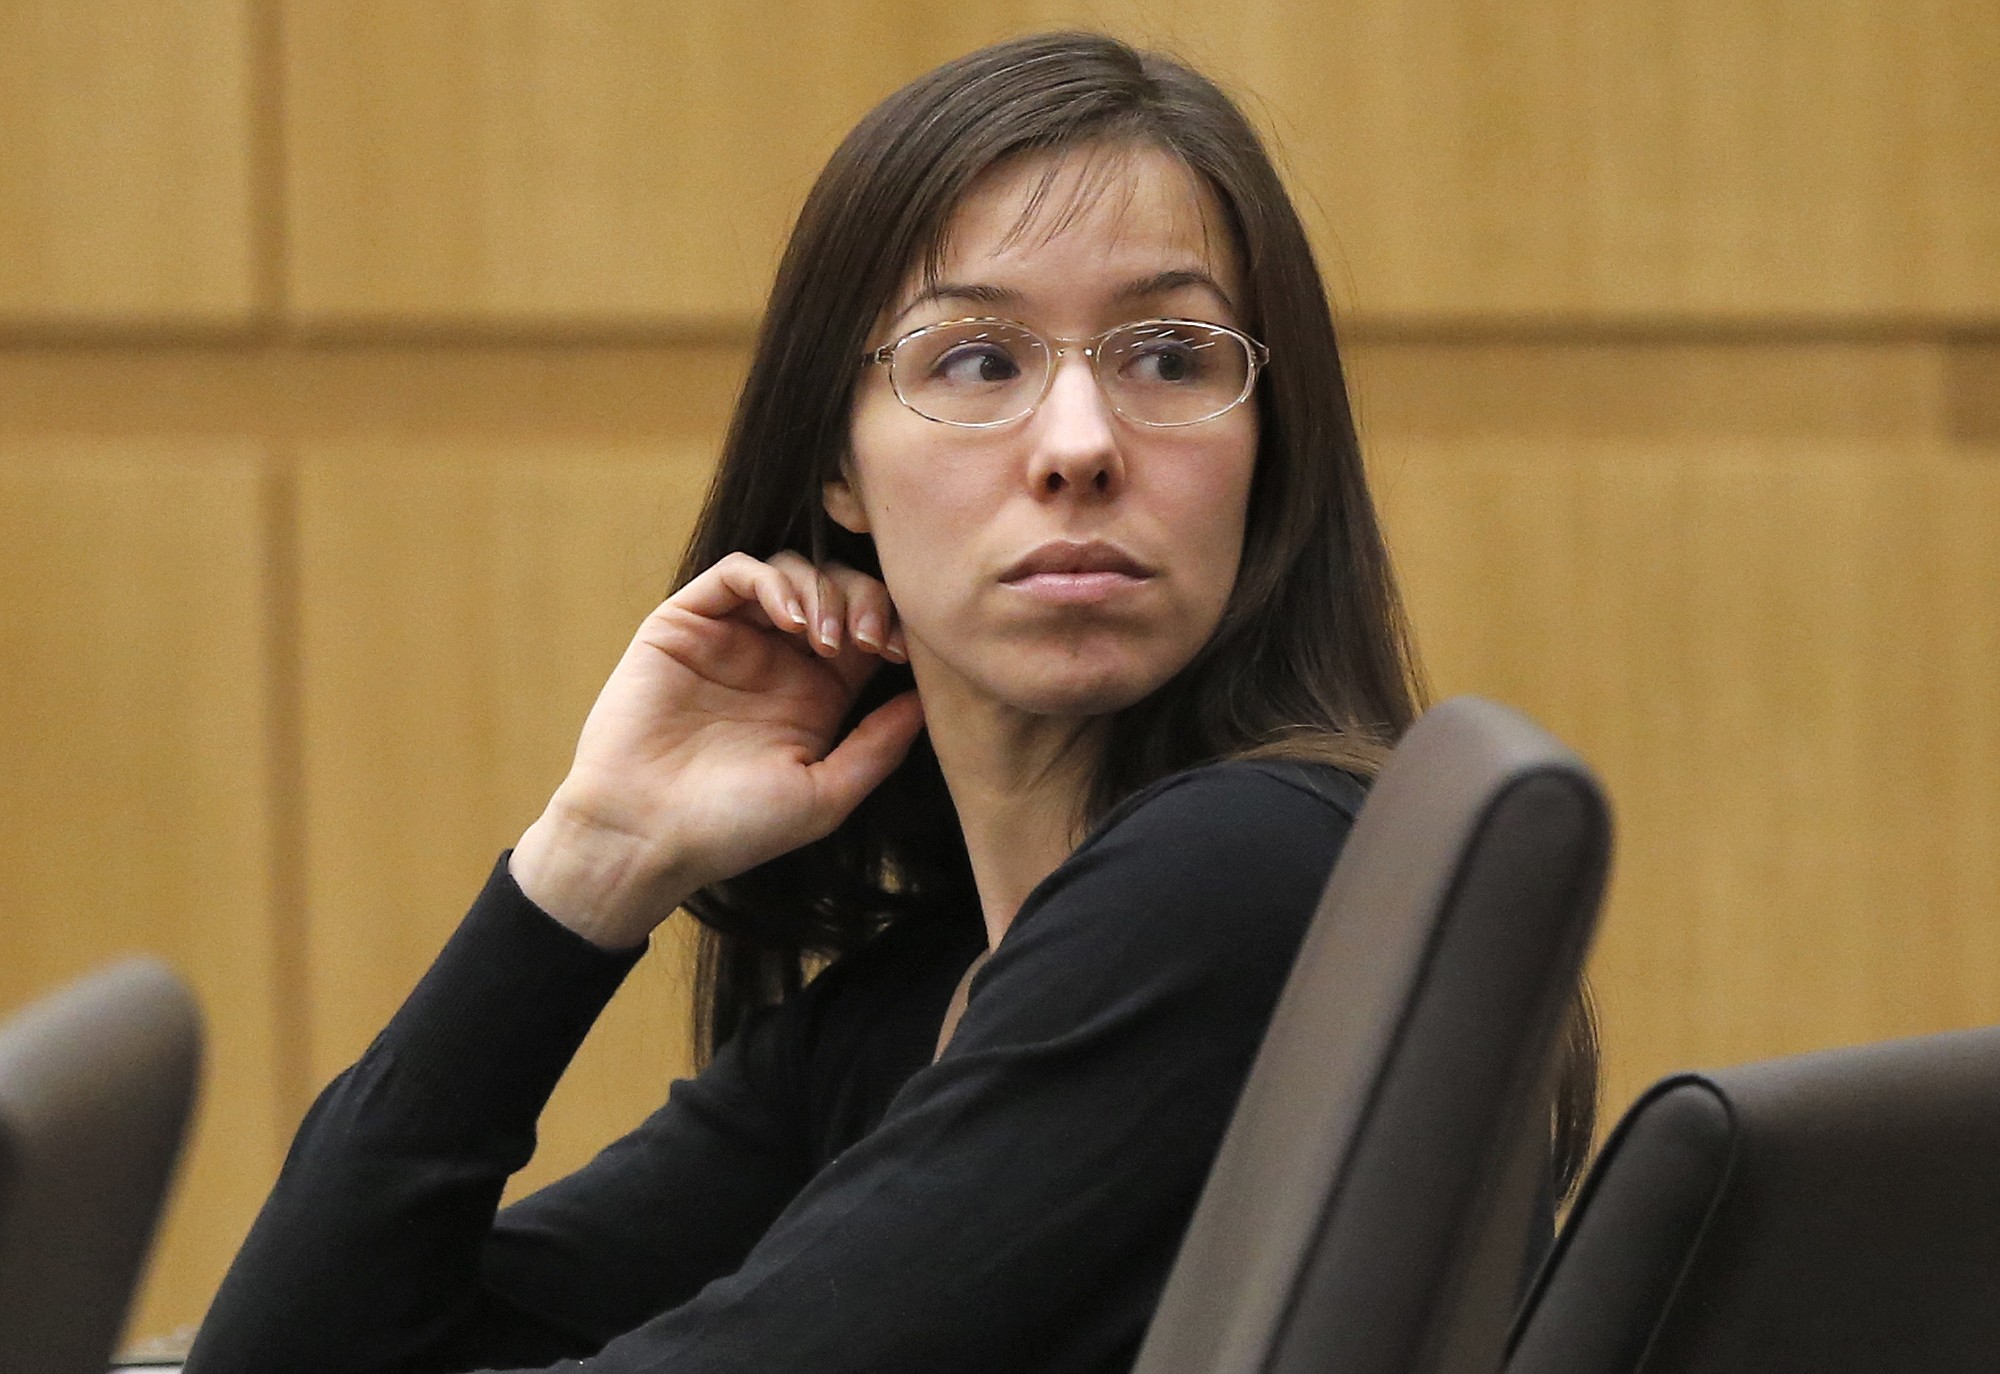 Jodi Arias appears in January 2013 for her trial in Maricopa County Superior court in Phoenix.